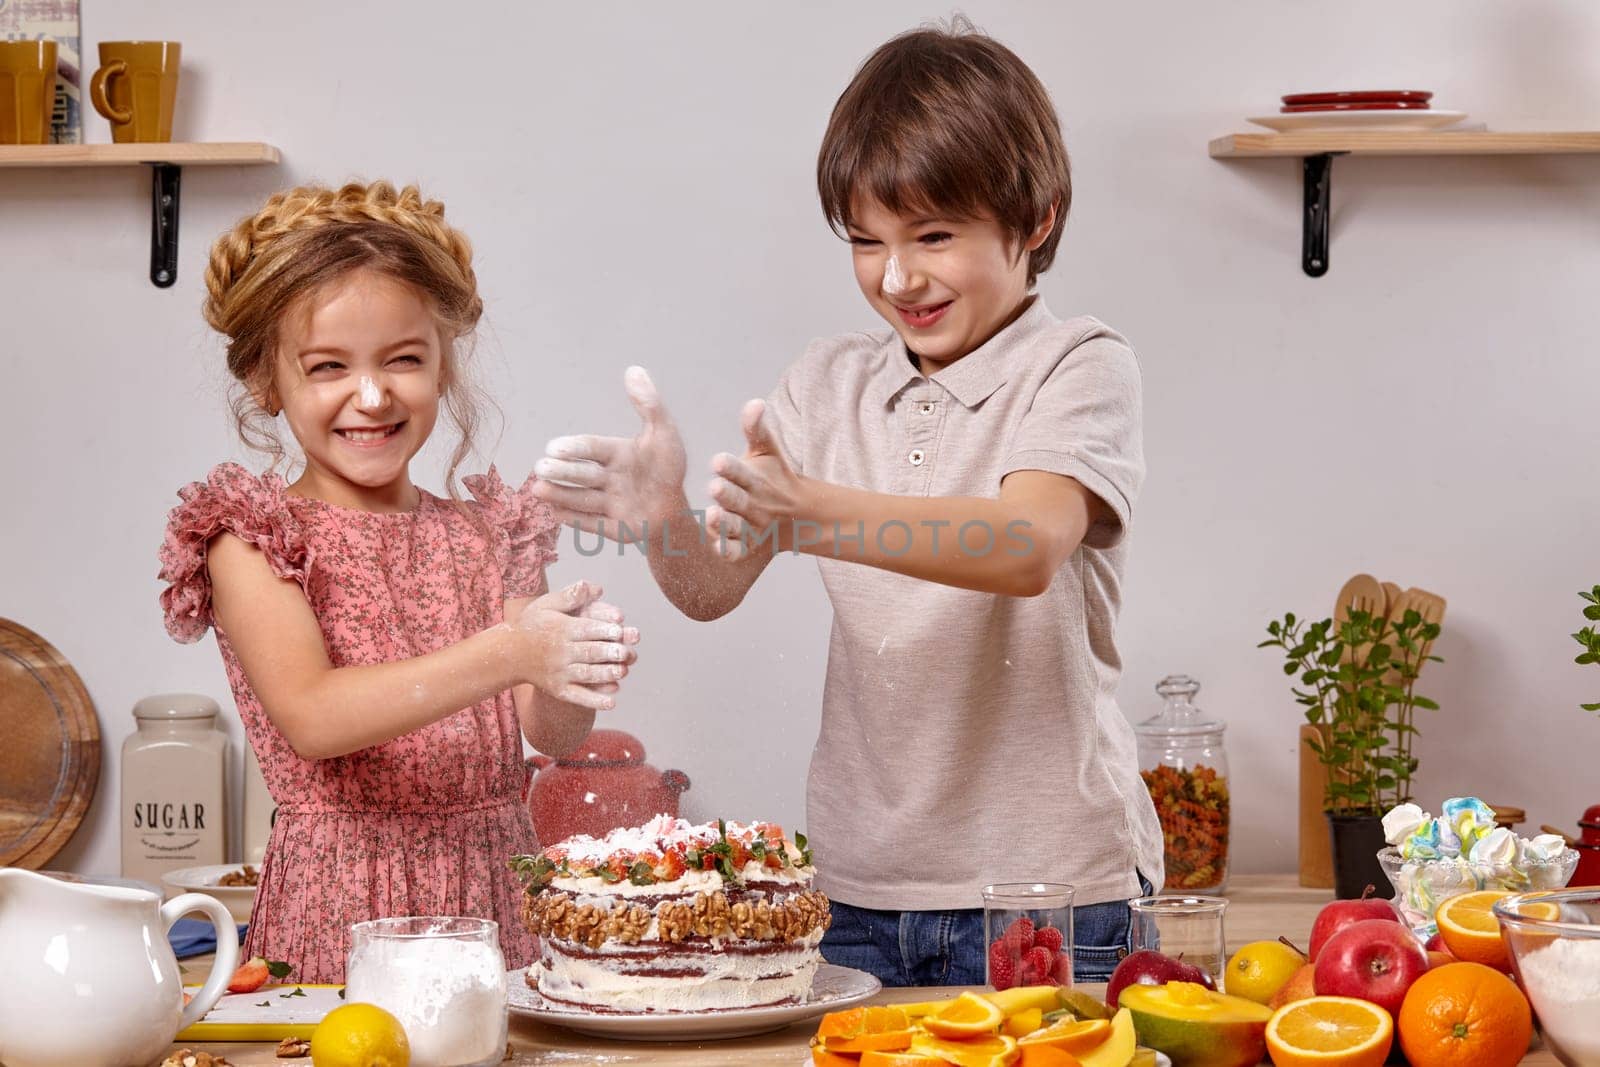 Brunette boy dressed in a light t-shirt and jeans and a little girl with a braid in her hair, wearing in a pink dress are making a cake at a kitchen, against a white wall with shelves on it. Children smeared their hands with powdered sugar and clapping it.